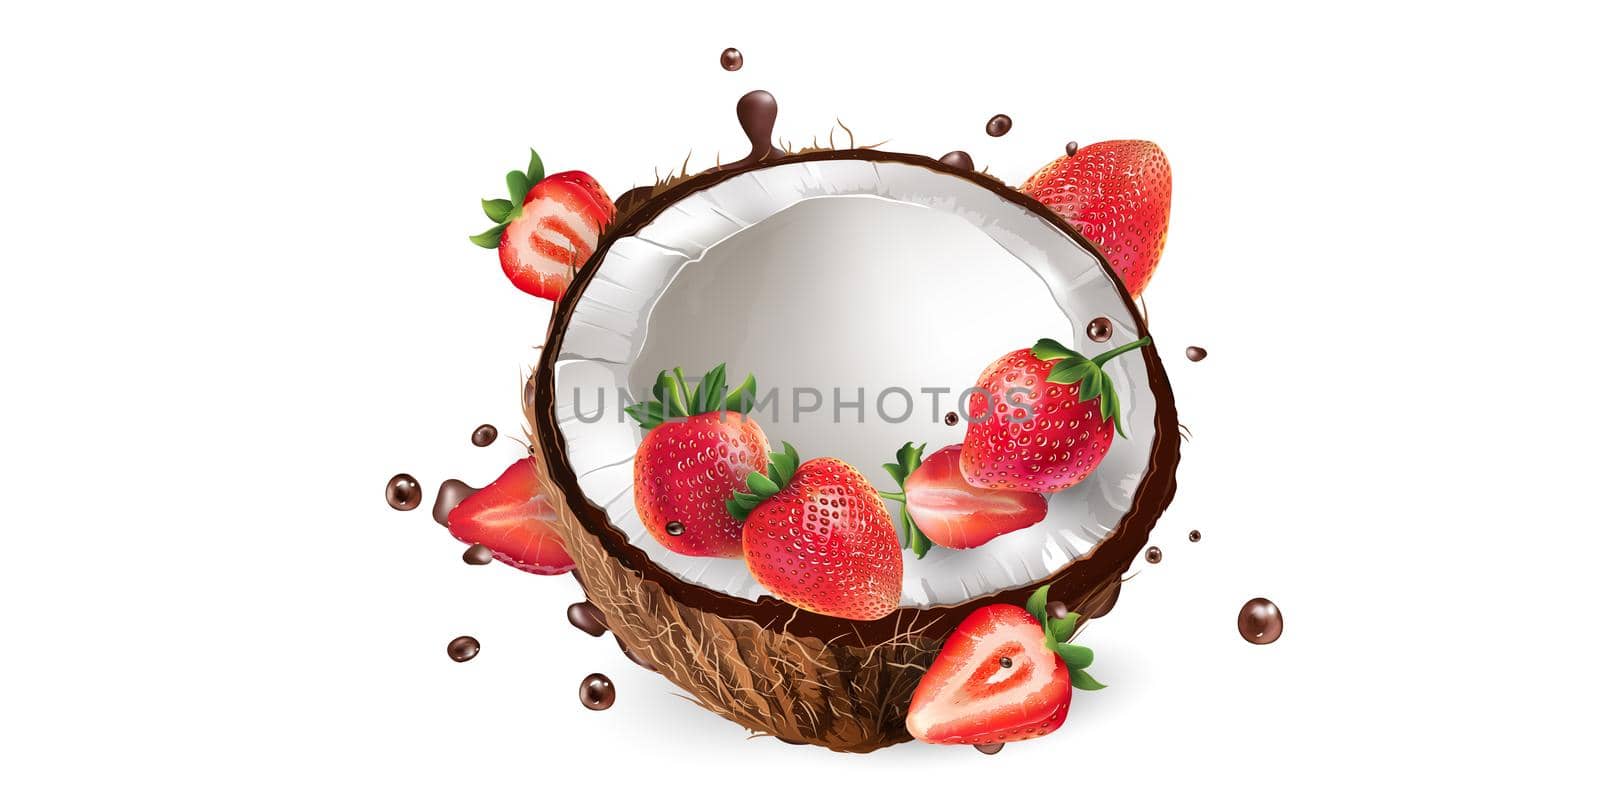 Fresh coconut with strawberries in chocolate splashes on a white background. Realistic style illustration.